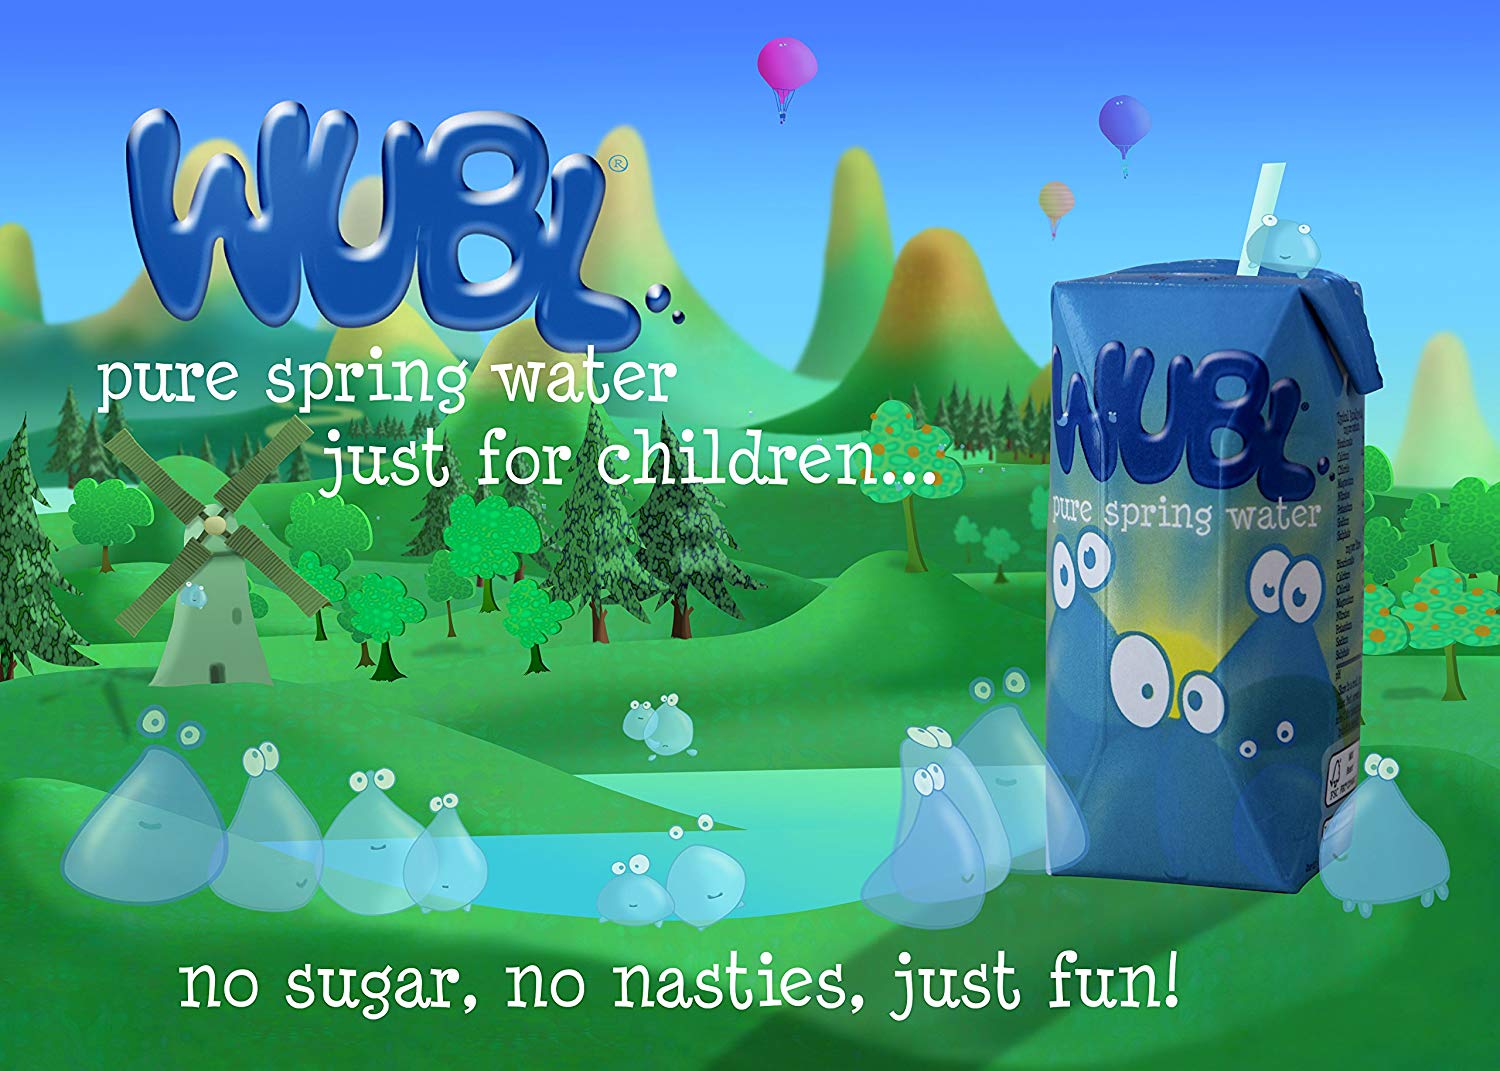 WUBL Water: Spring Water just for Kids